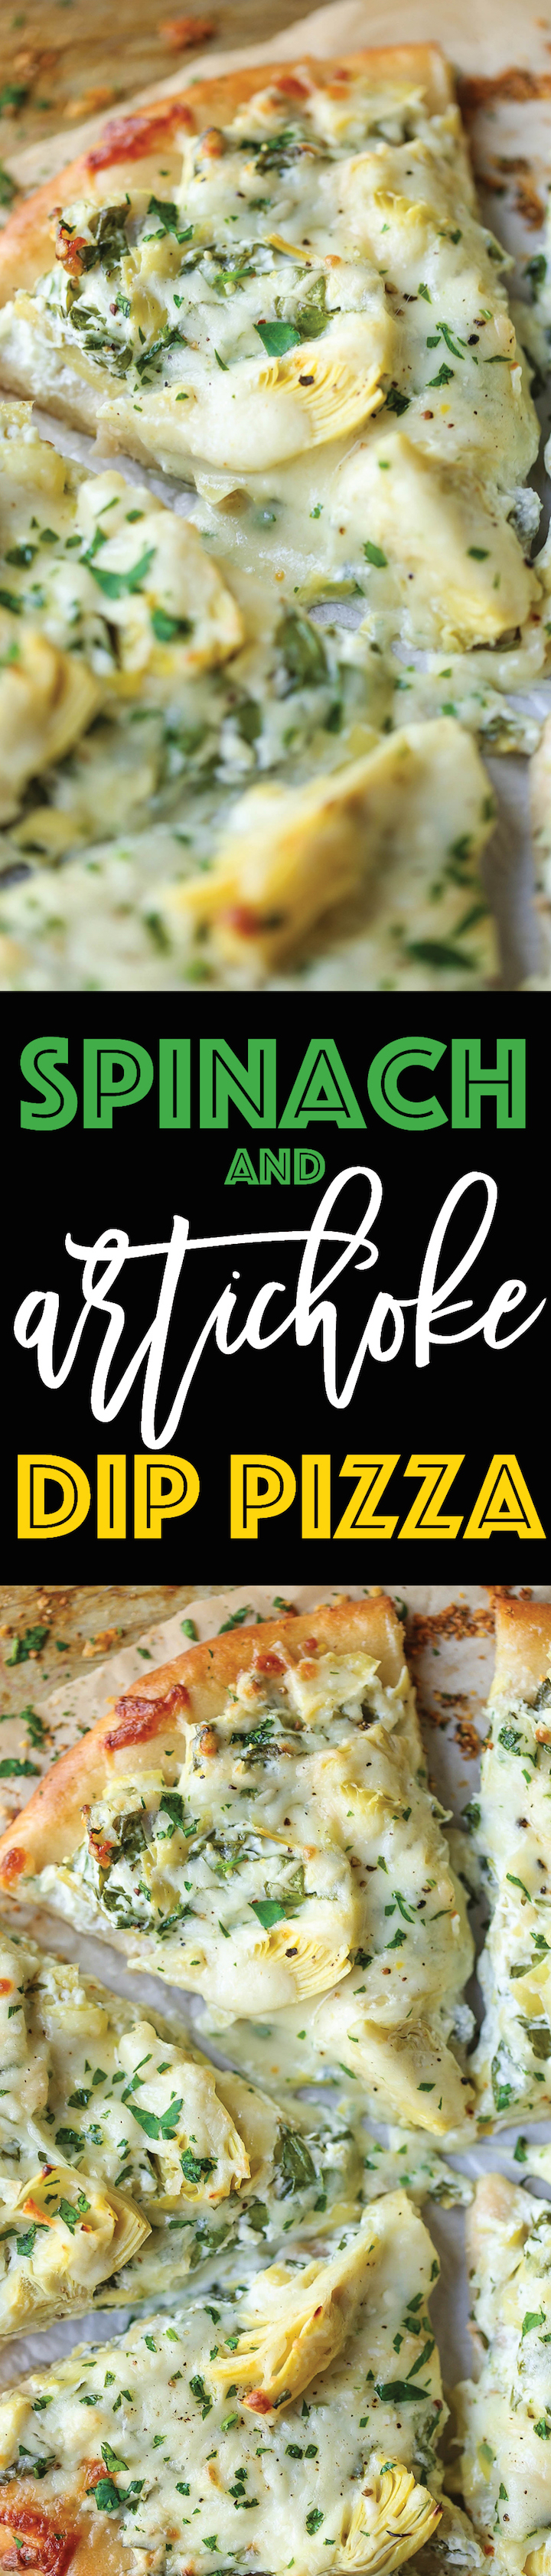 Spinach and Artichoke Dip Pizza - Everyone's favorite classic dip is turned into a pizza! It's so cheesy, utterly creamy and melt-in-your-mouth AH-MAZING!